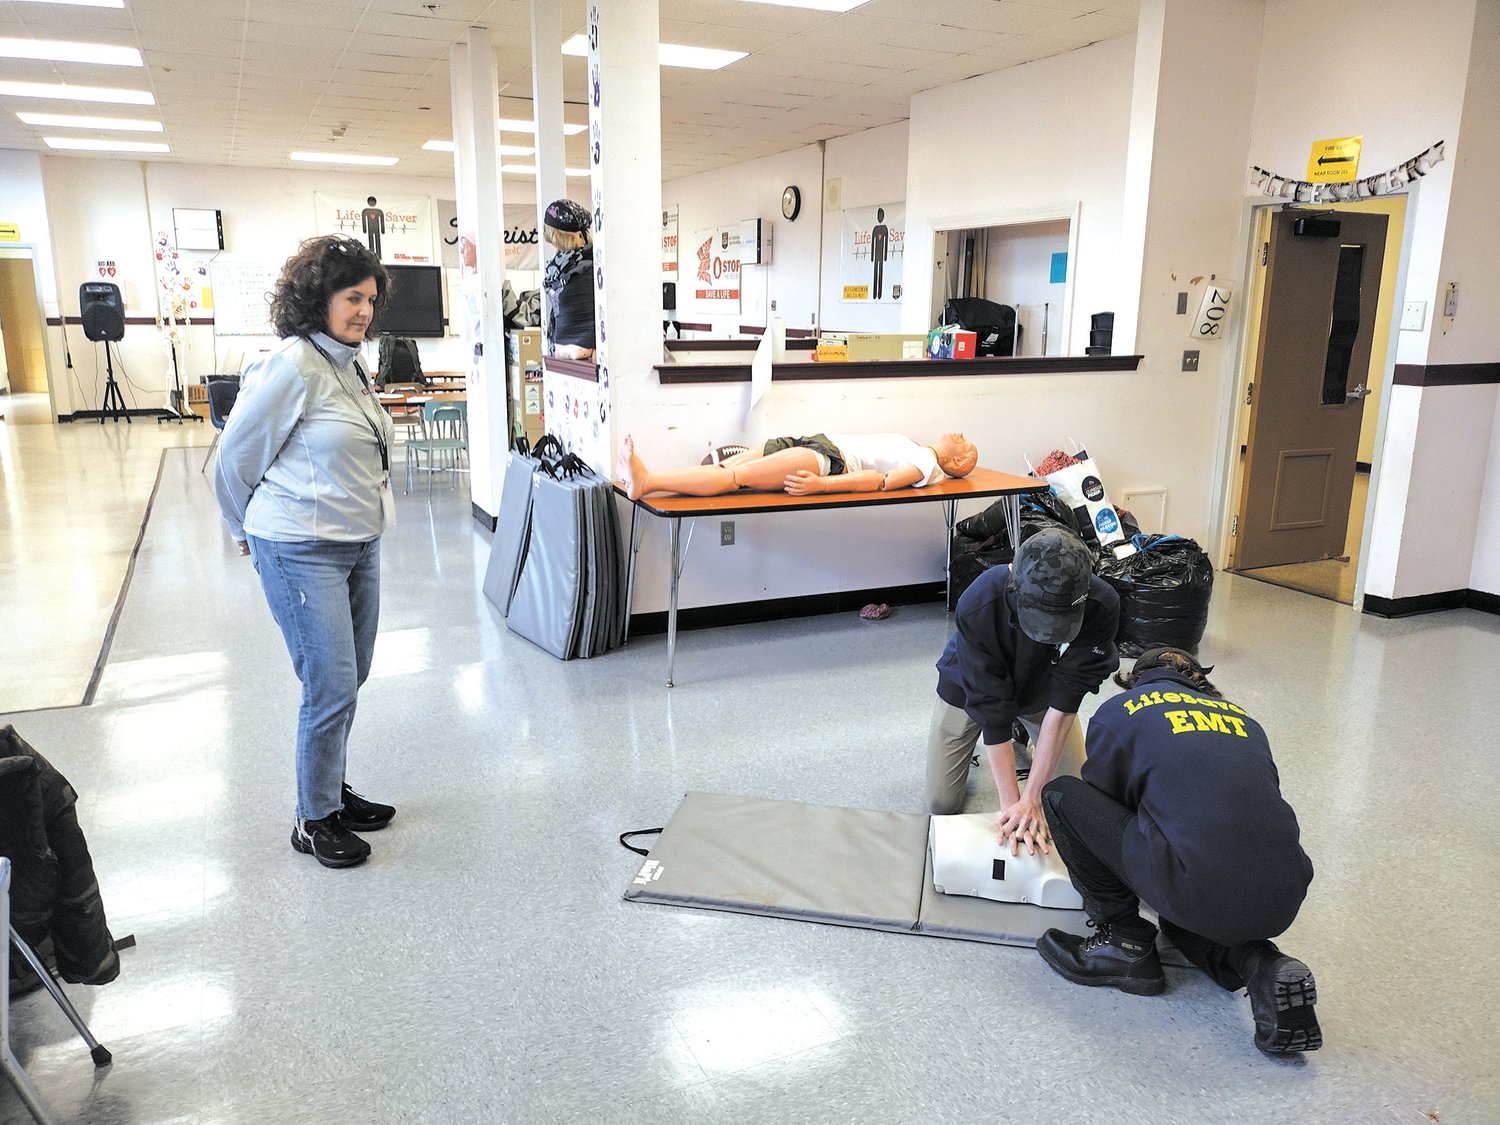 PREPARED FOR AN EMERGENCY: Lisa Tamburini observes as Pilgrim freshmen Will Auger and Ian Machado practice CPR. Both students are members of the Pilgrim Emergency Medical Team, a student organization on call for first aid at school events.